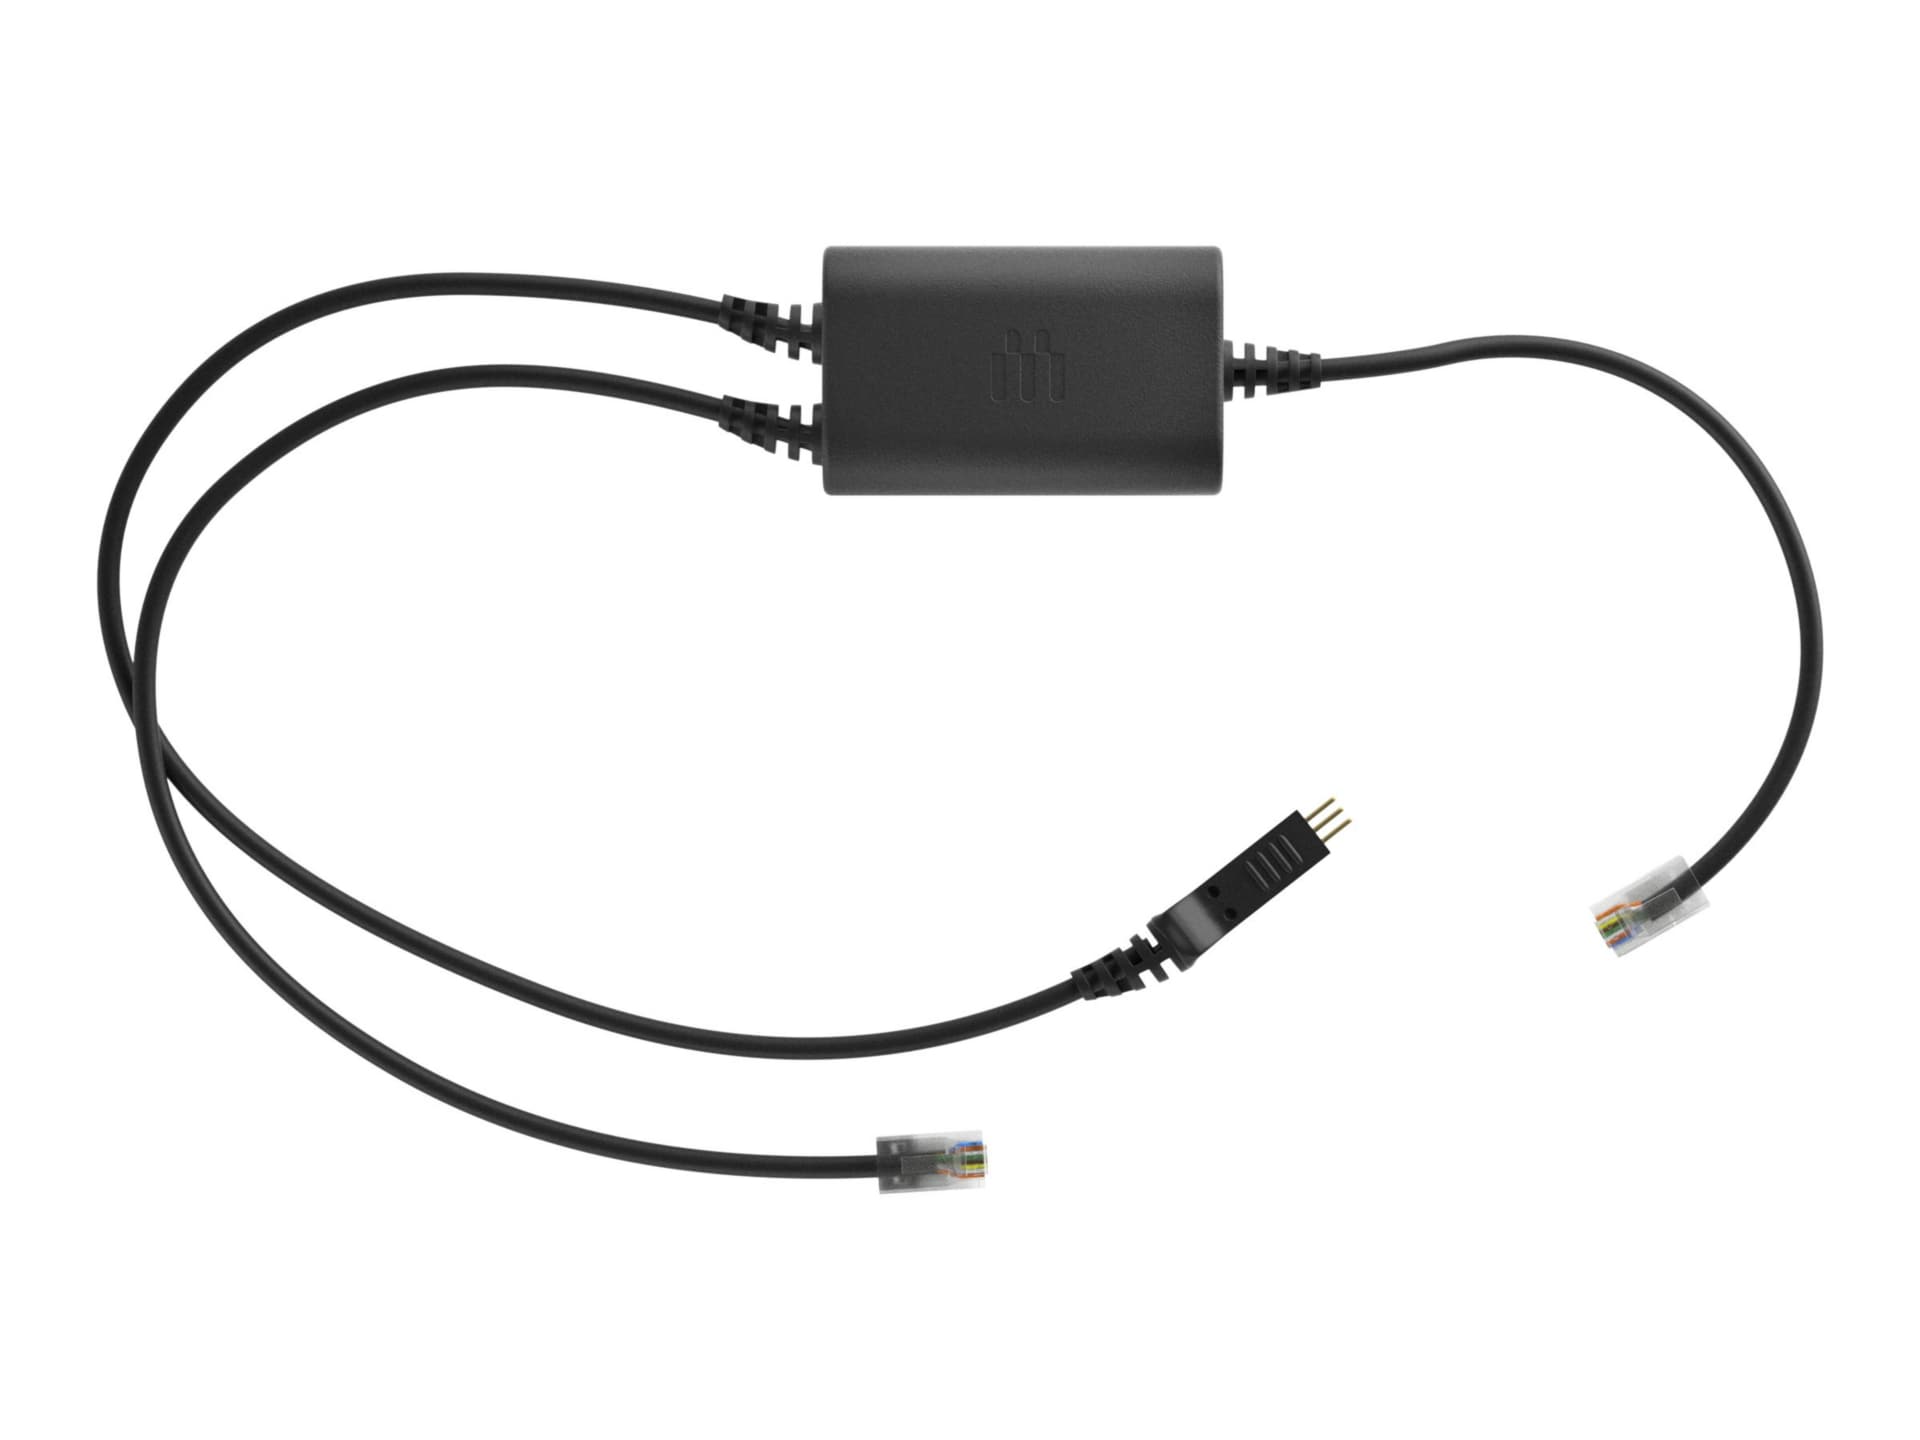 EPOS Sennheiser Ploycom Cable for Electronic Hook Switch